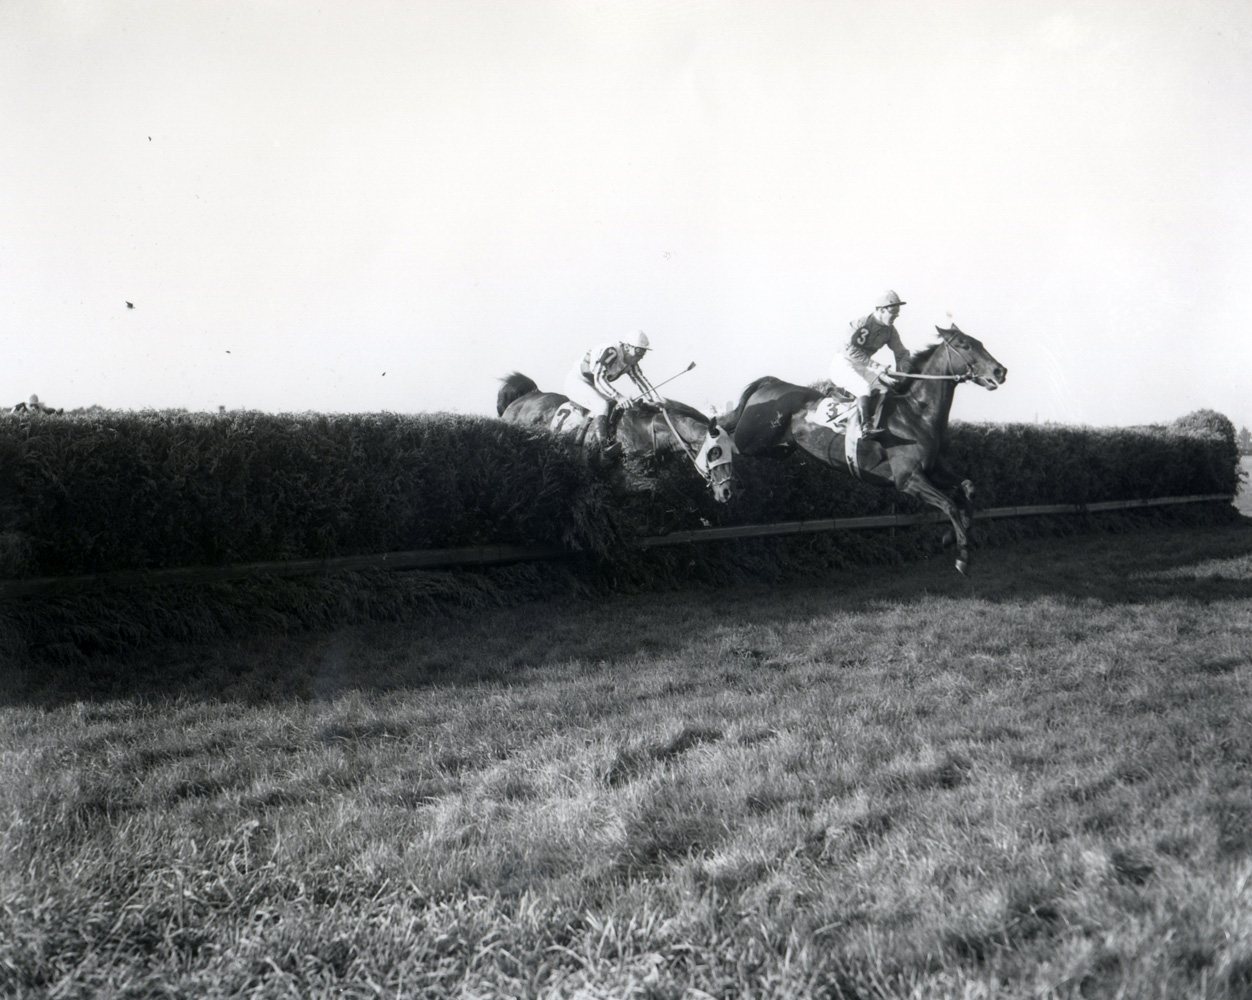 Oedipus (Albert Foot up) clearing a jump on his way to win the 1951 Grand National at Belmont Park (Keeneland Library Morgan Collection/Museum Collection)